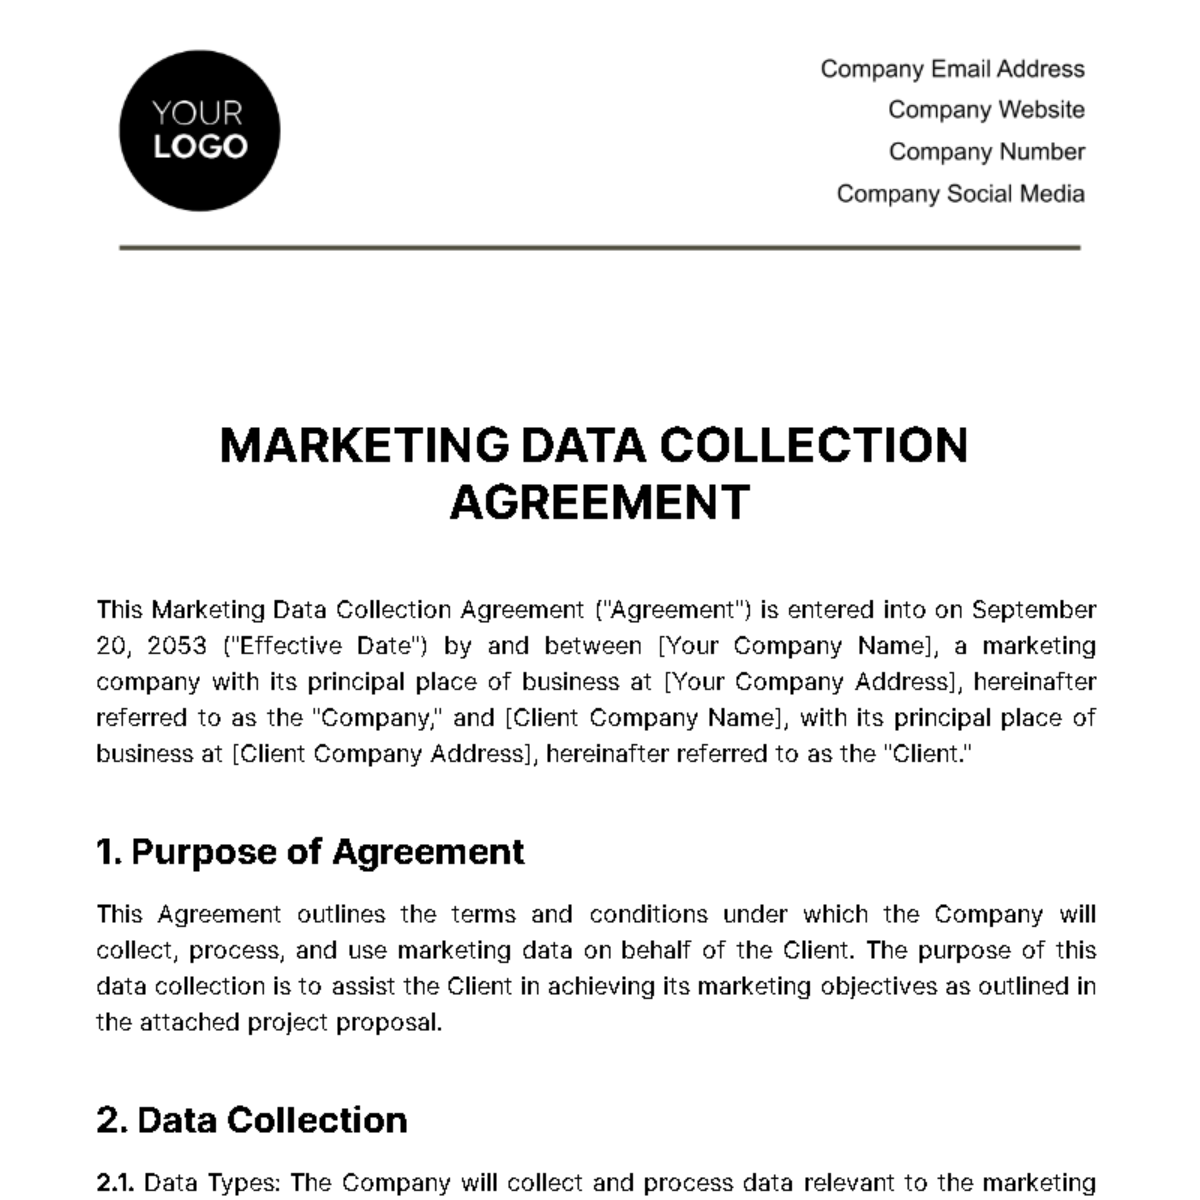 Marketing Data Collection Agreement Template